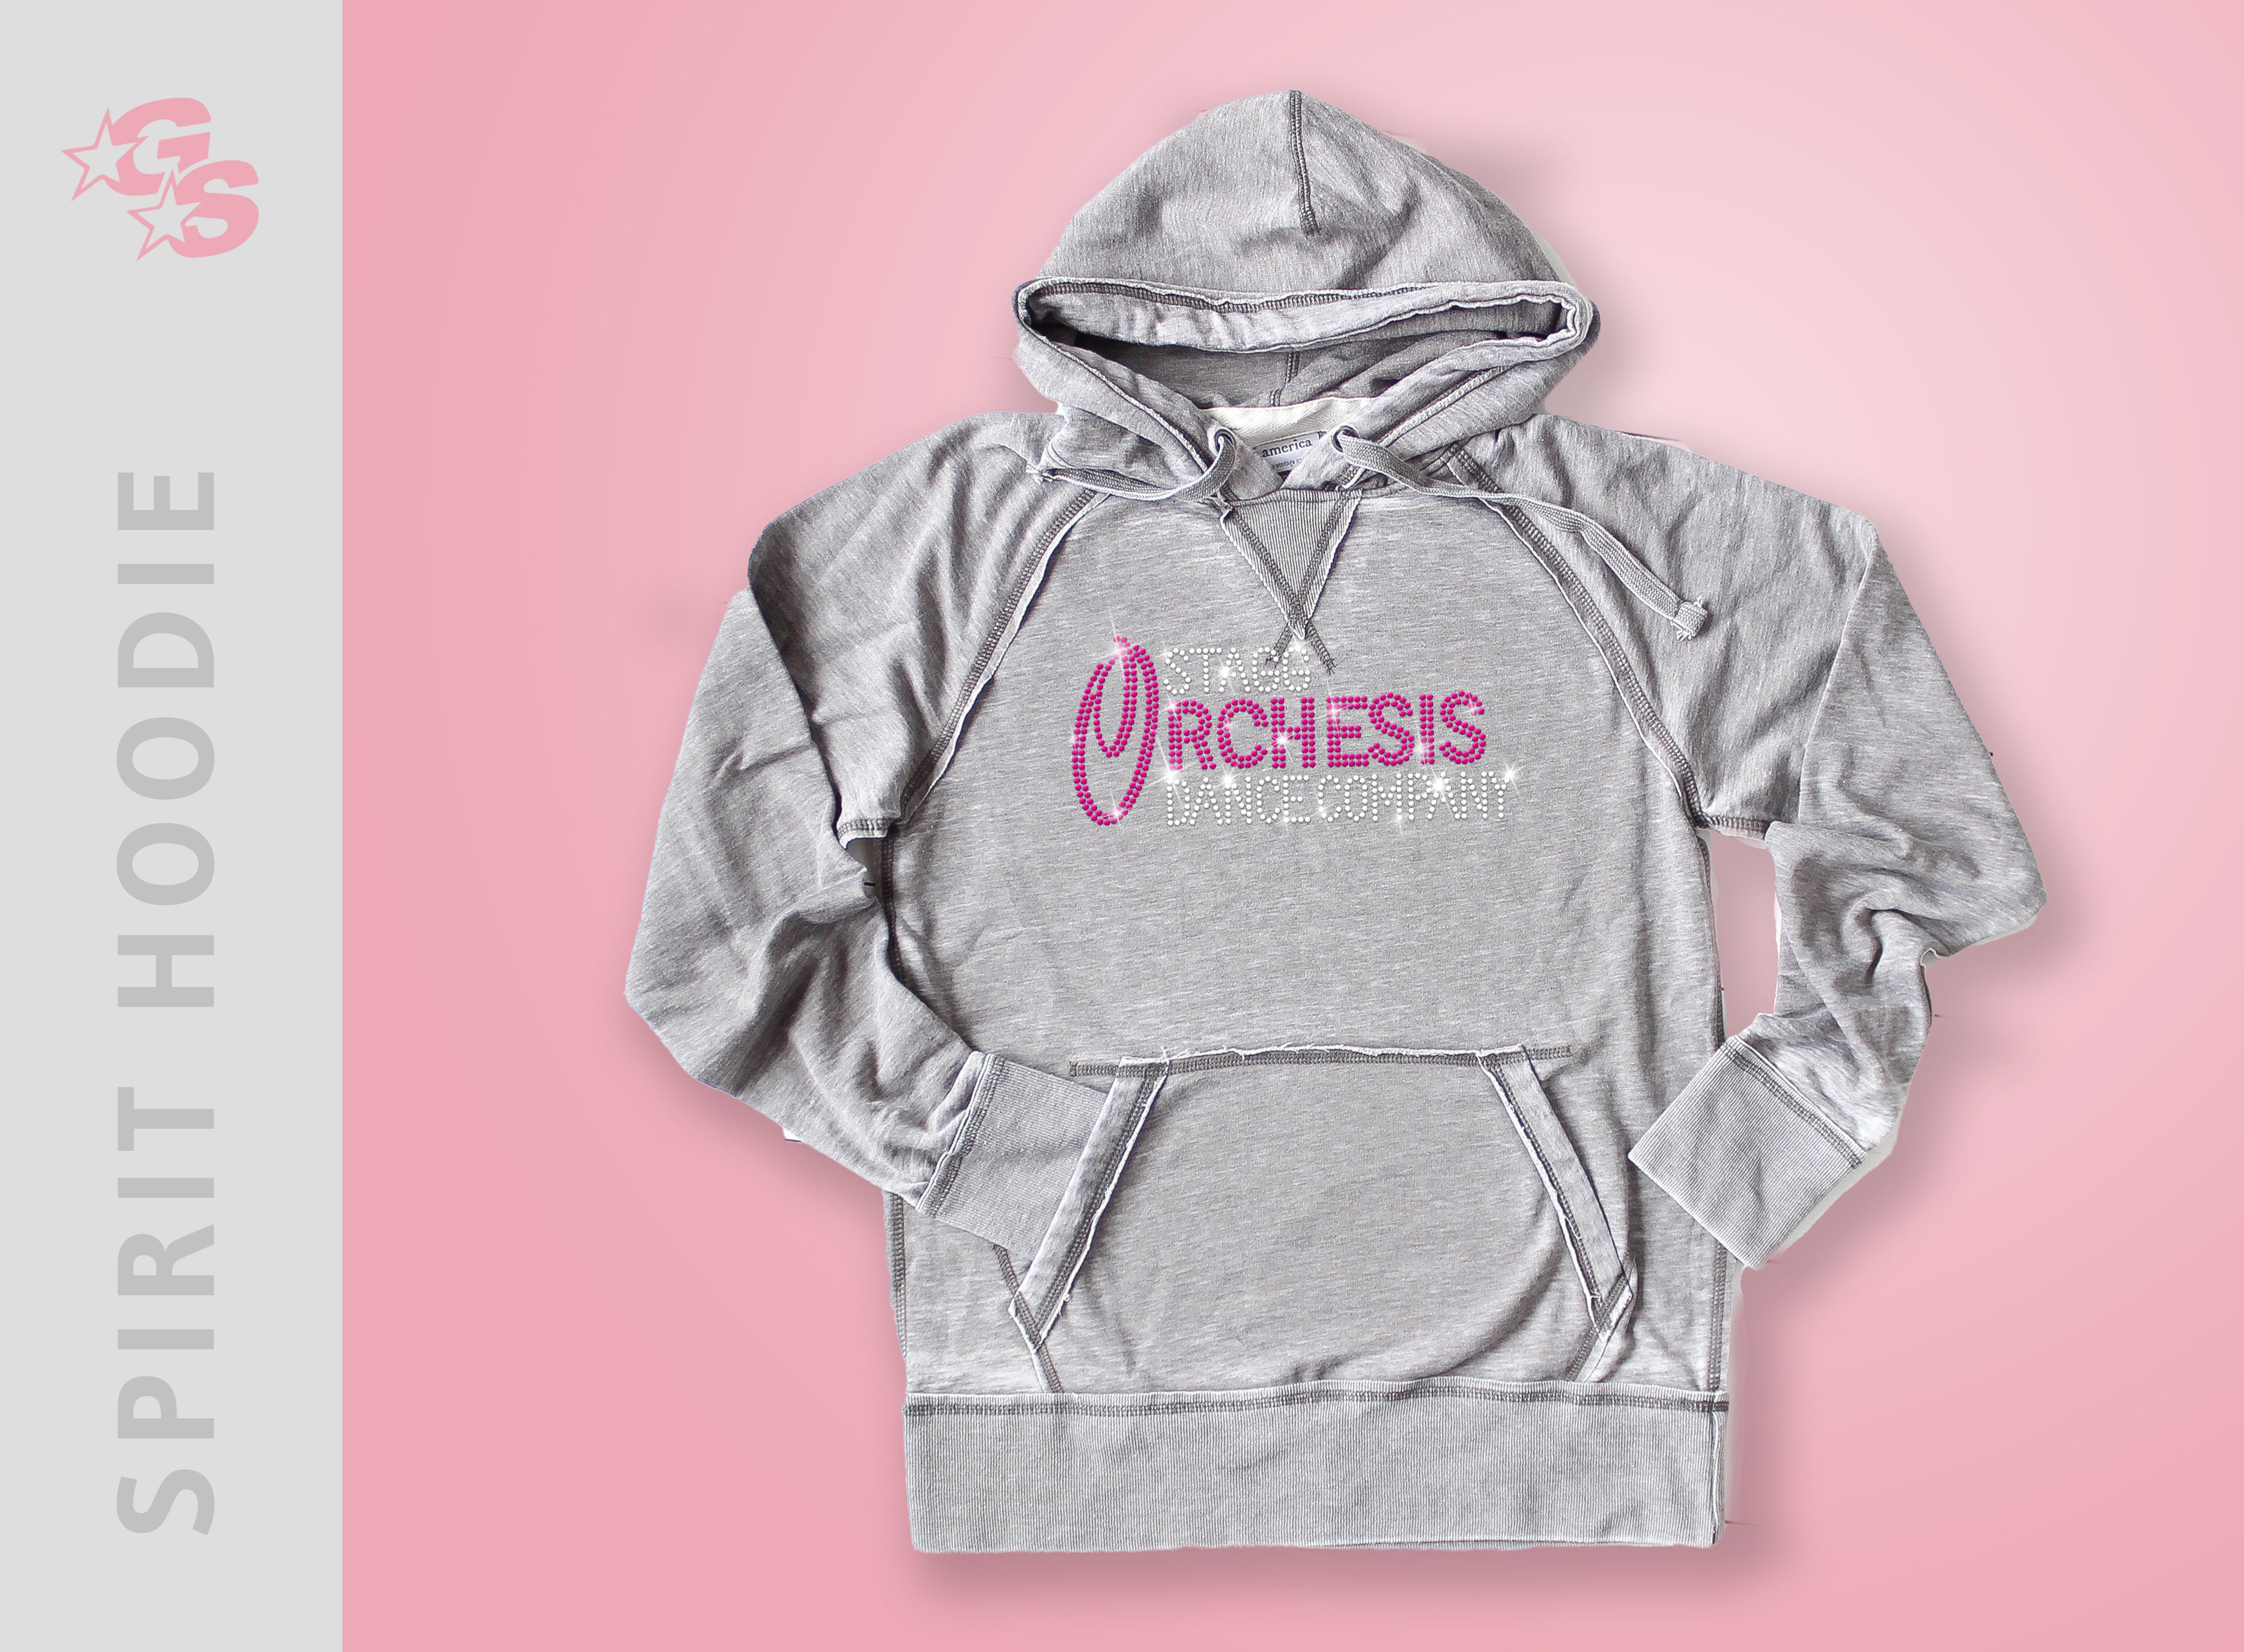 Stagg Orchesis Dance Company Spirit Hoodie